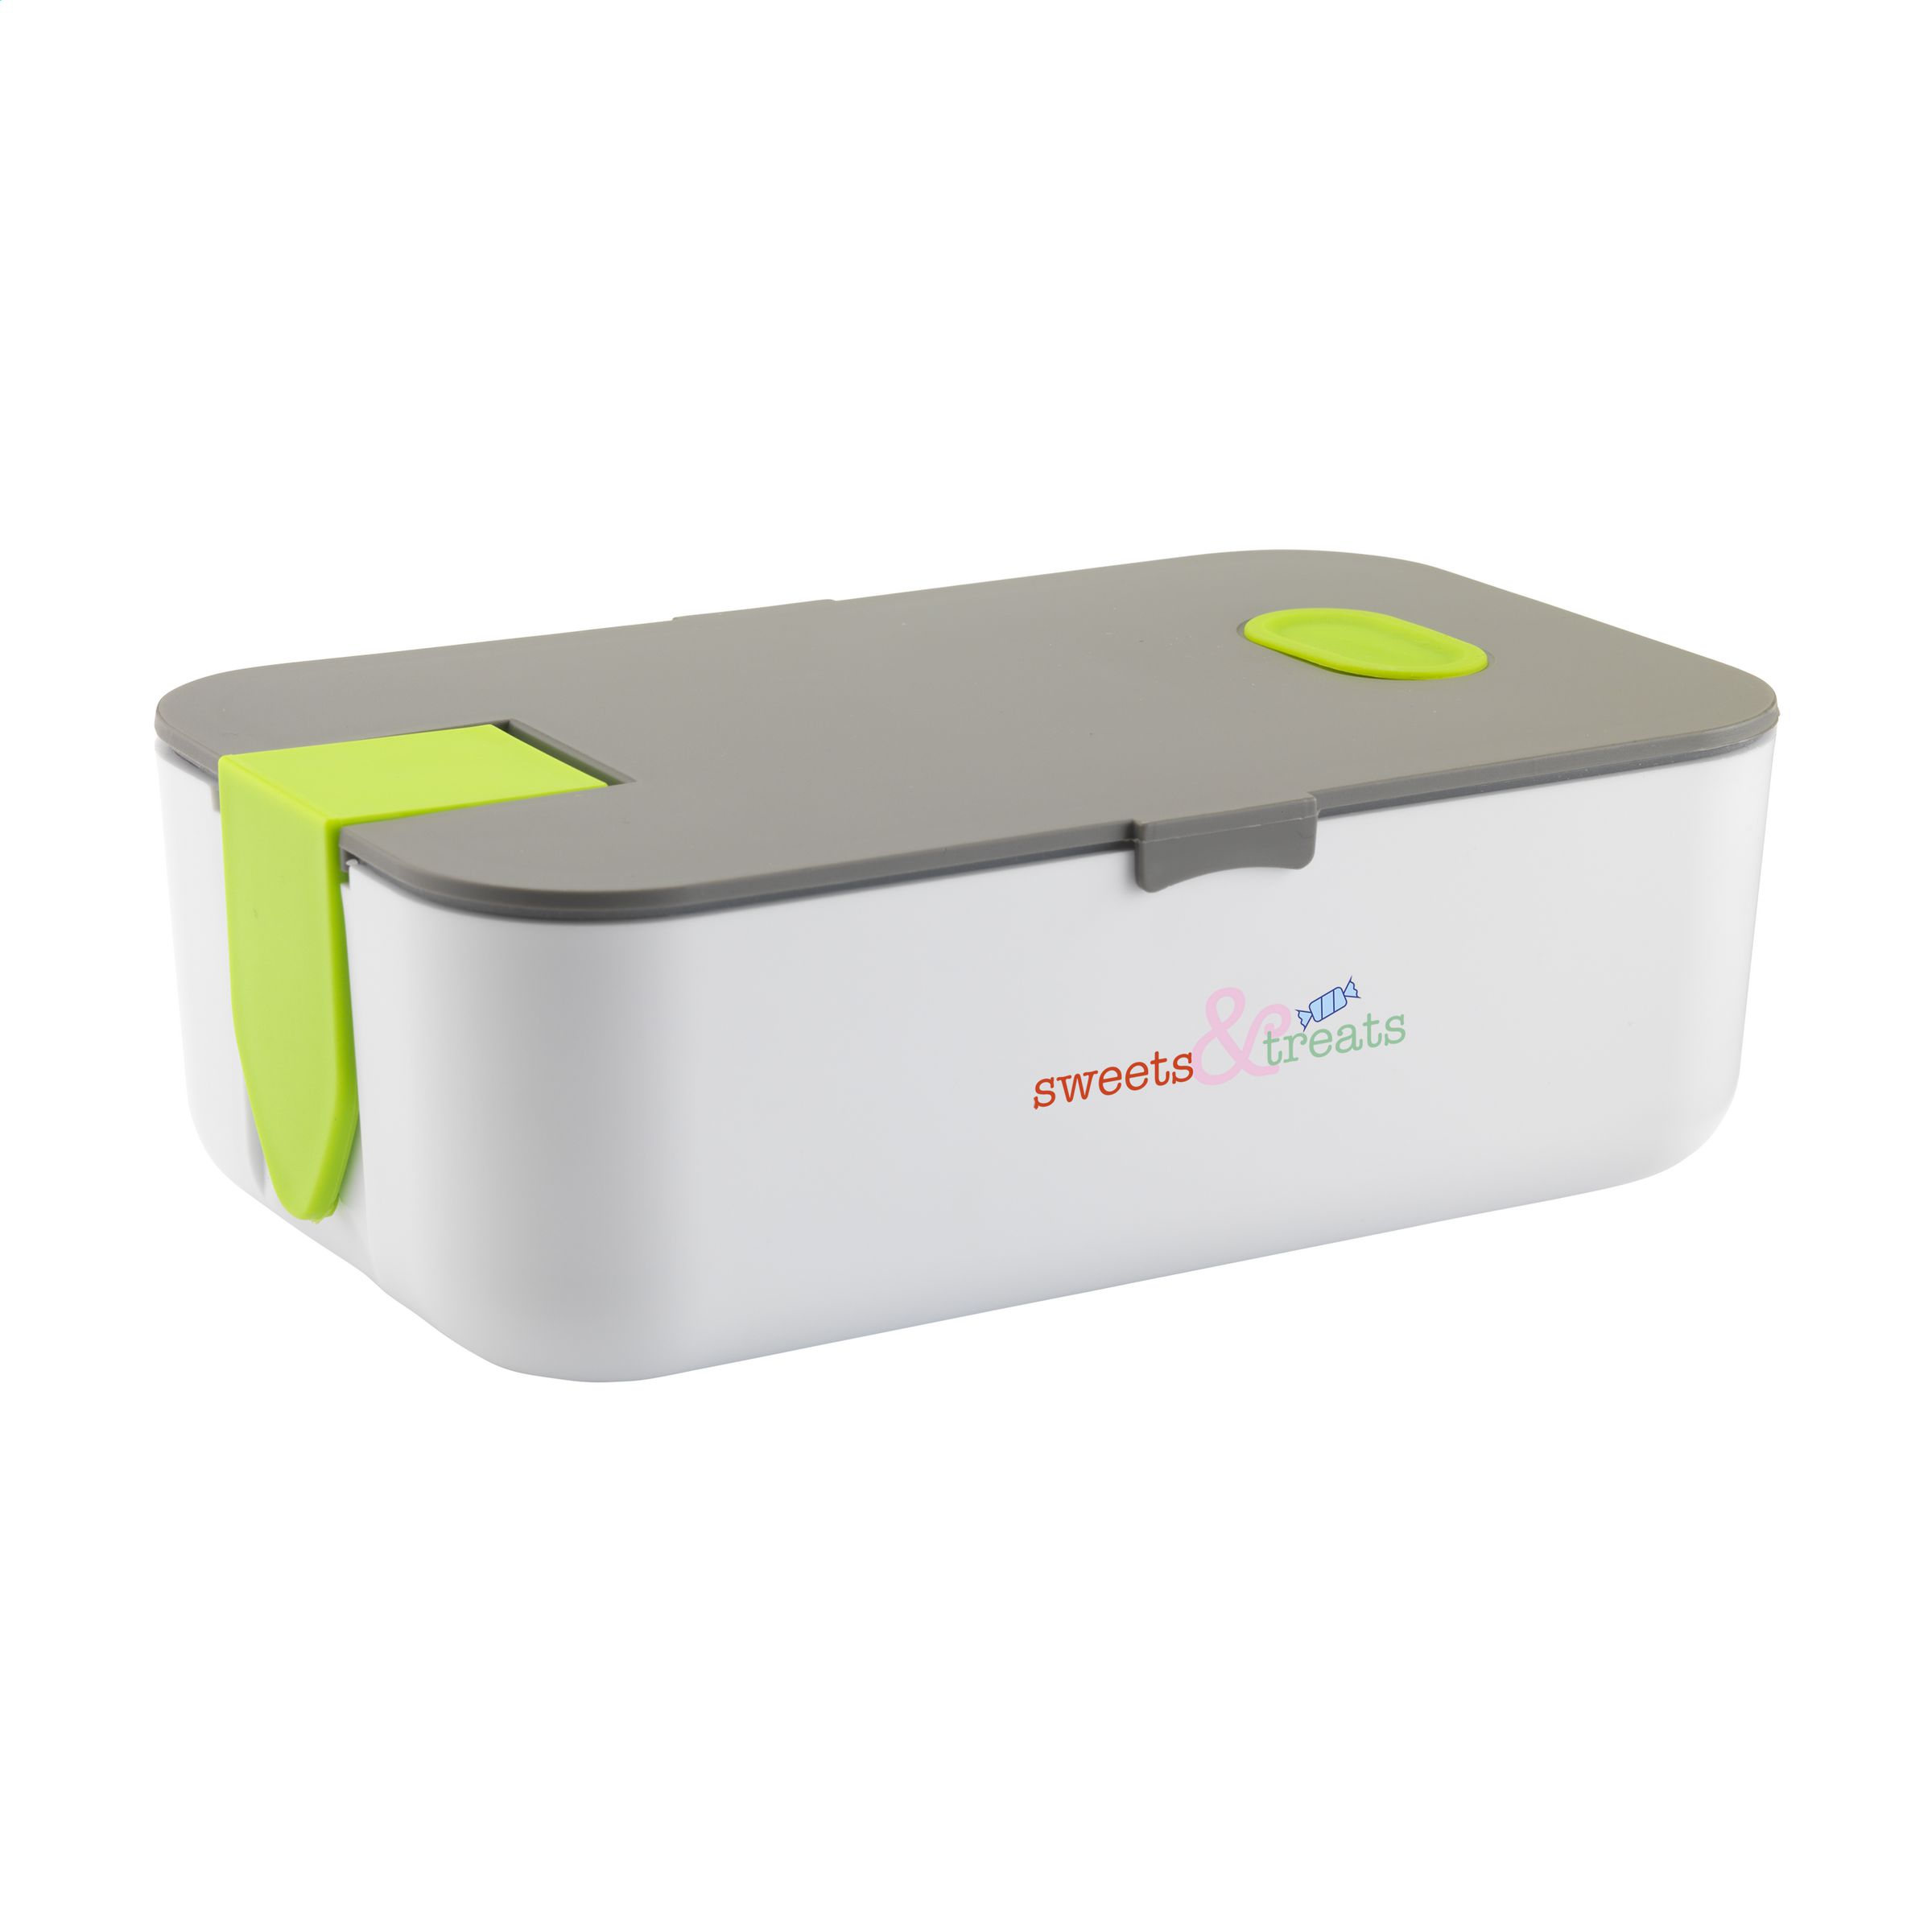 Luxury Plastic Lunchbox with Silicone Seal and Removable Divider - Church Gresley